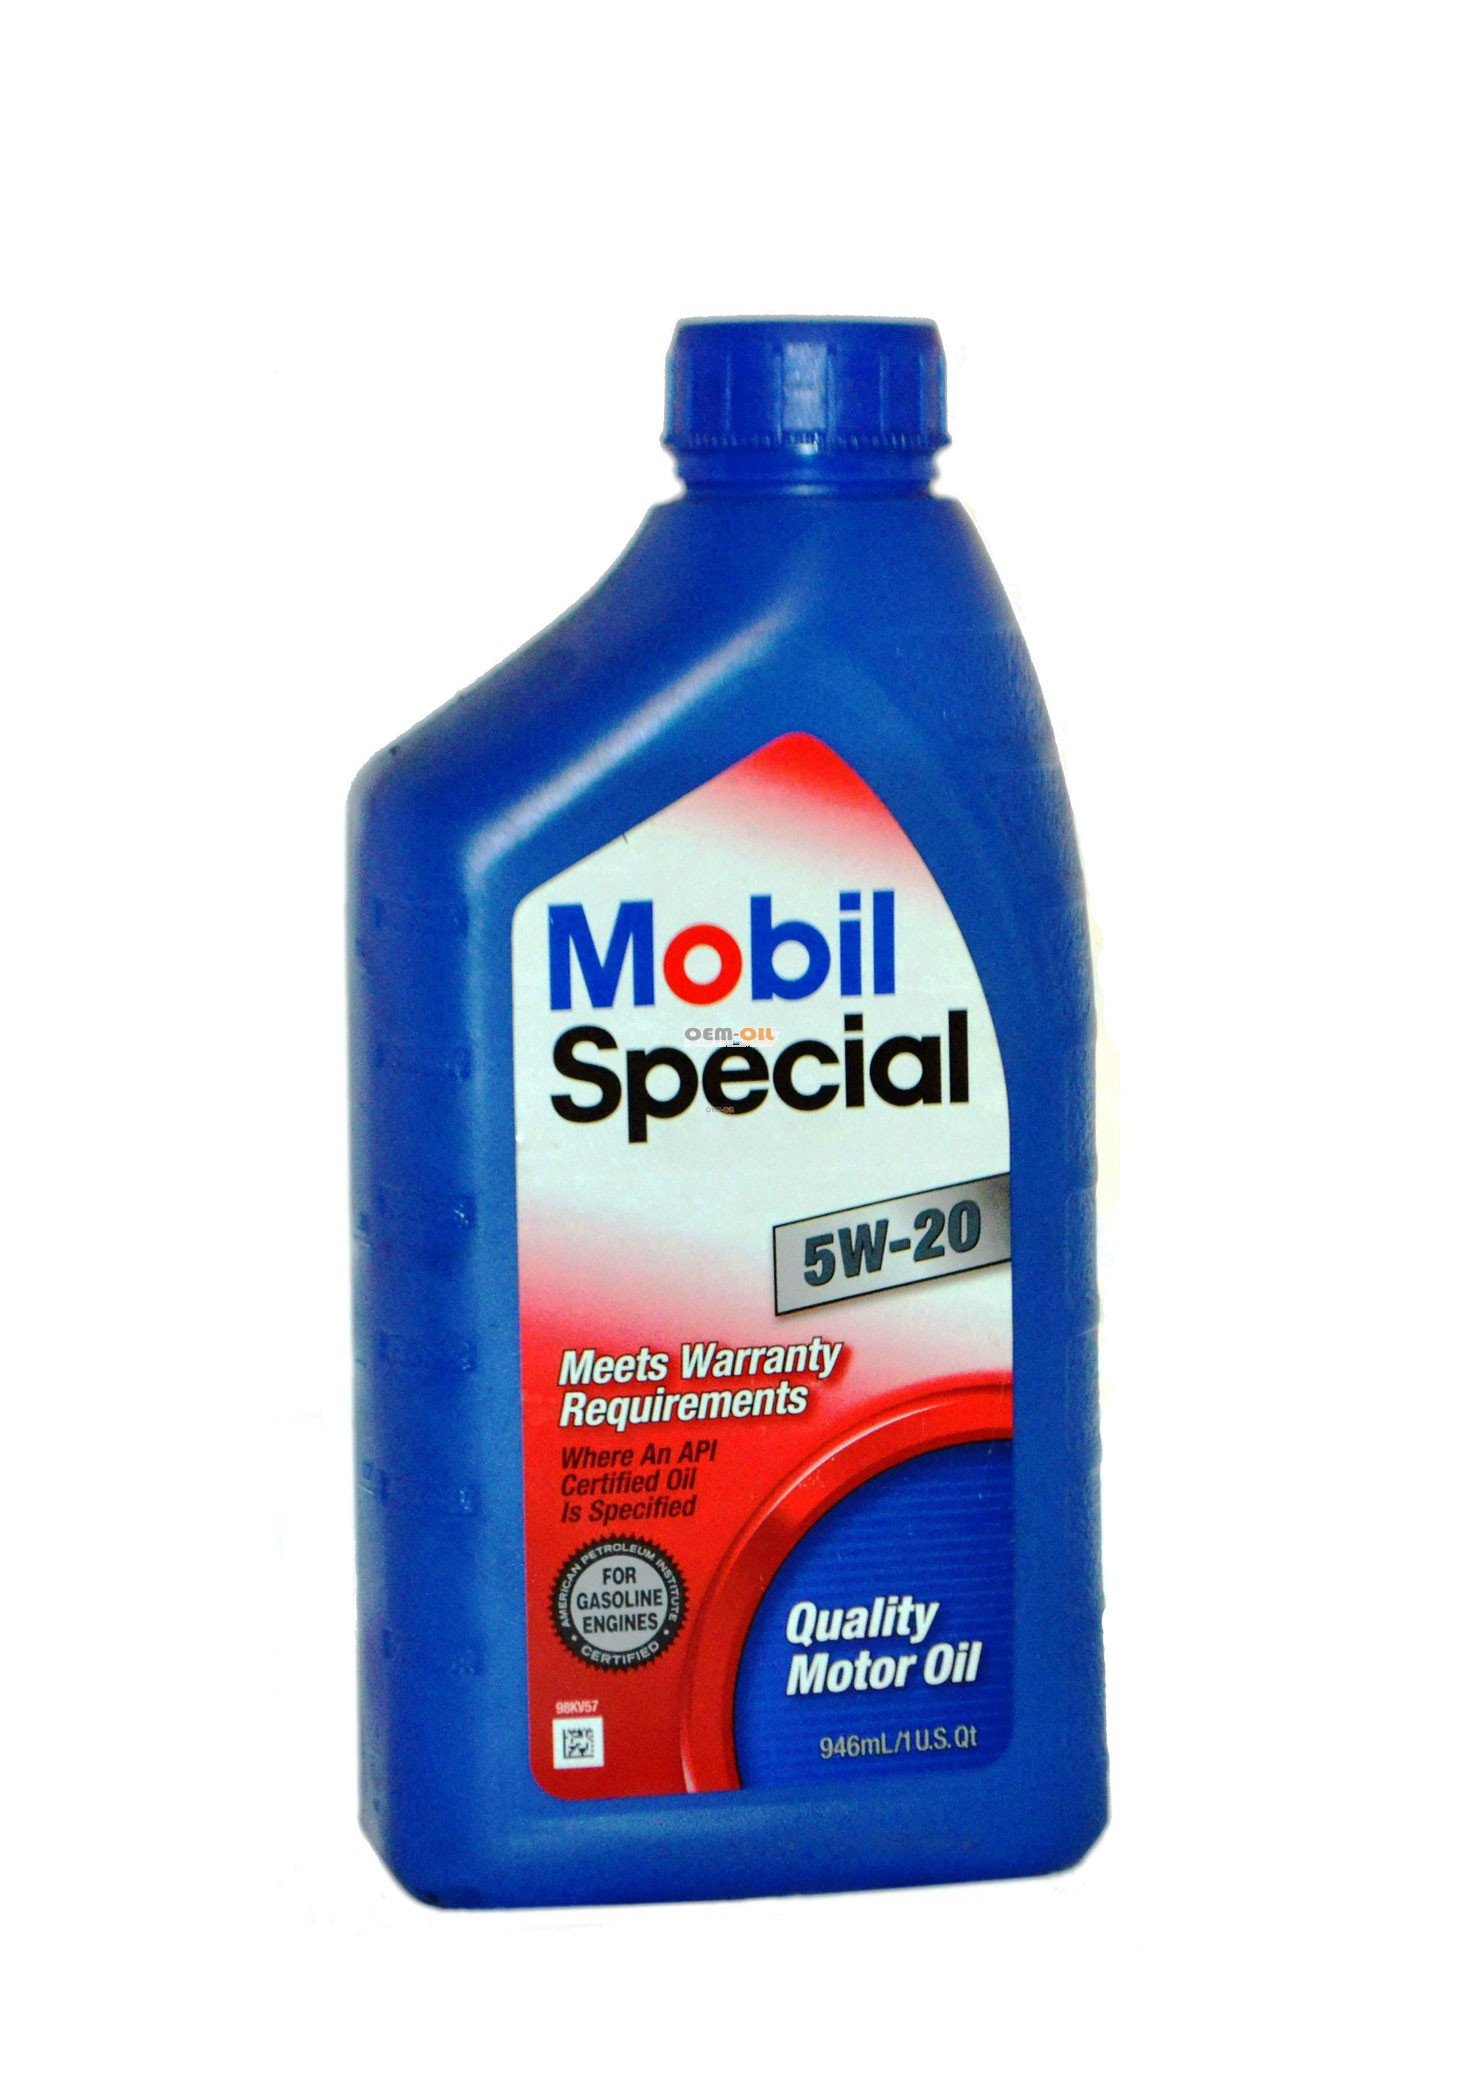 Mobil Special 5W-20